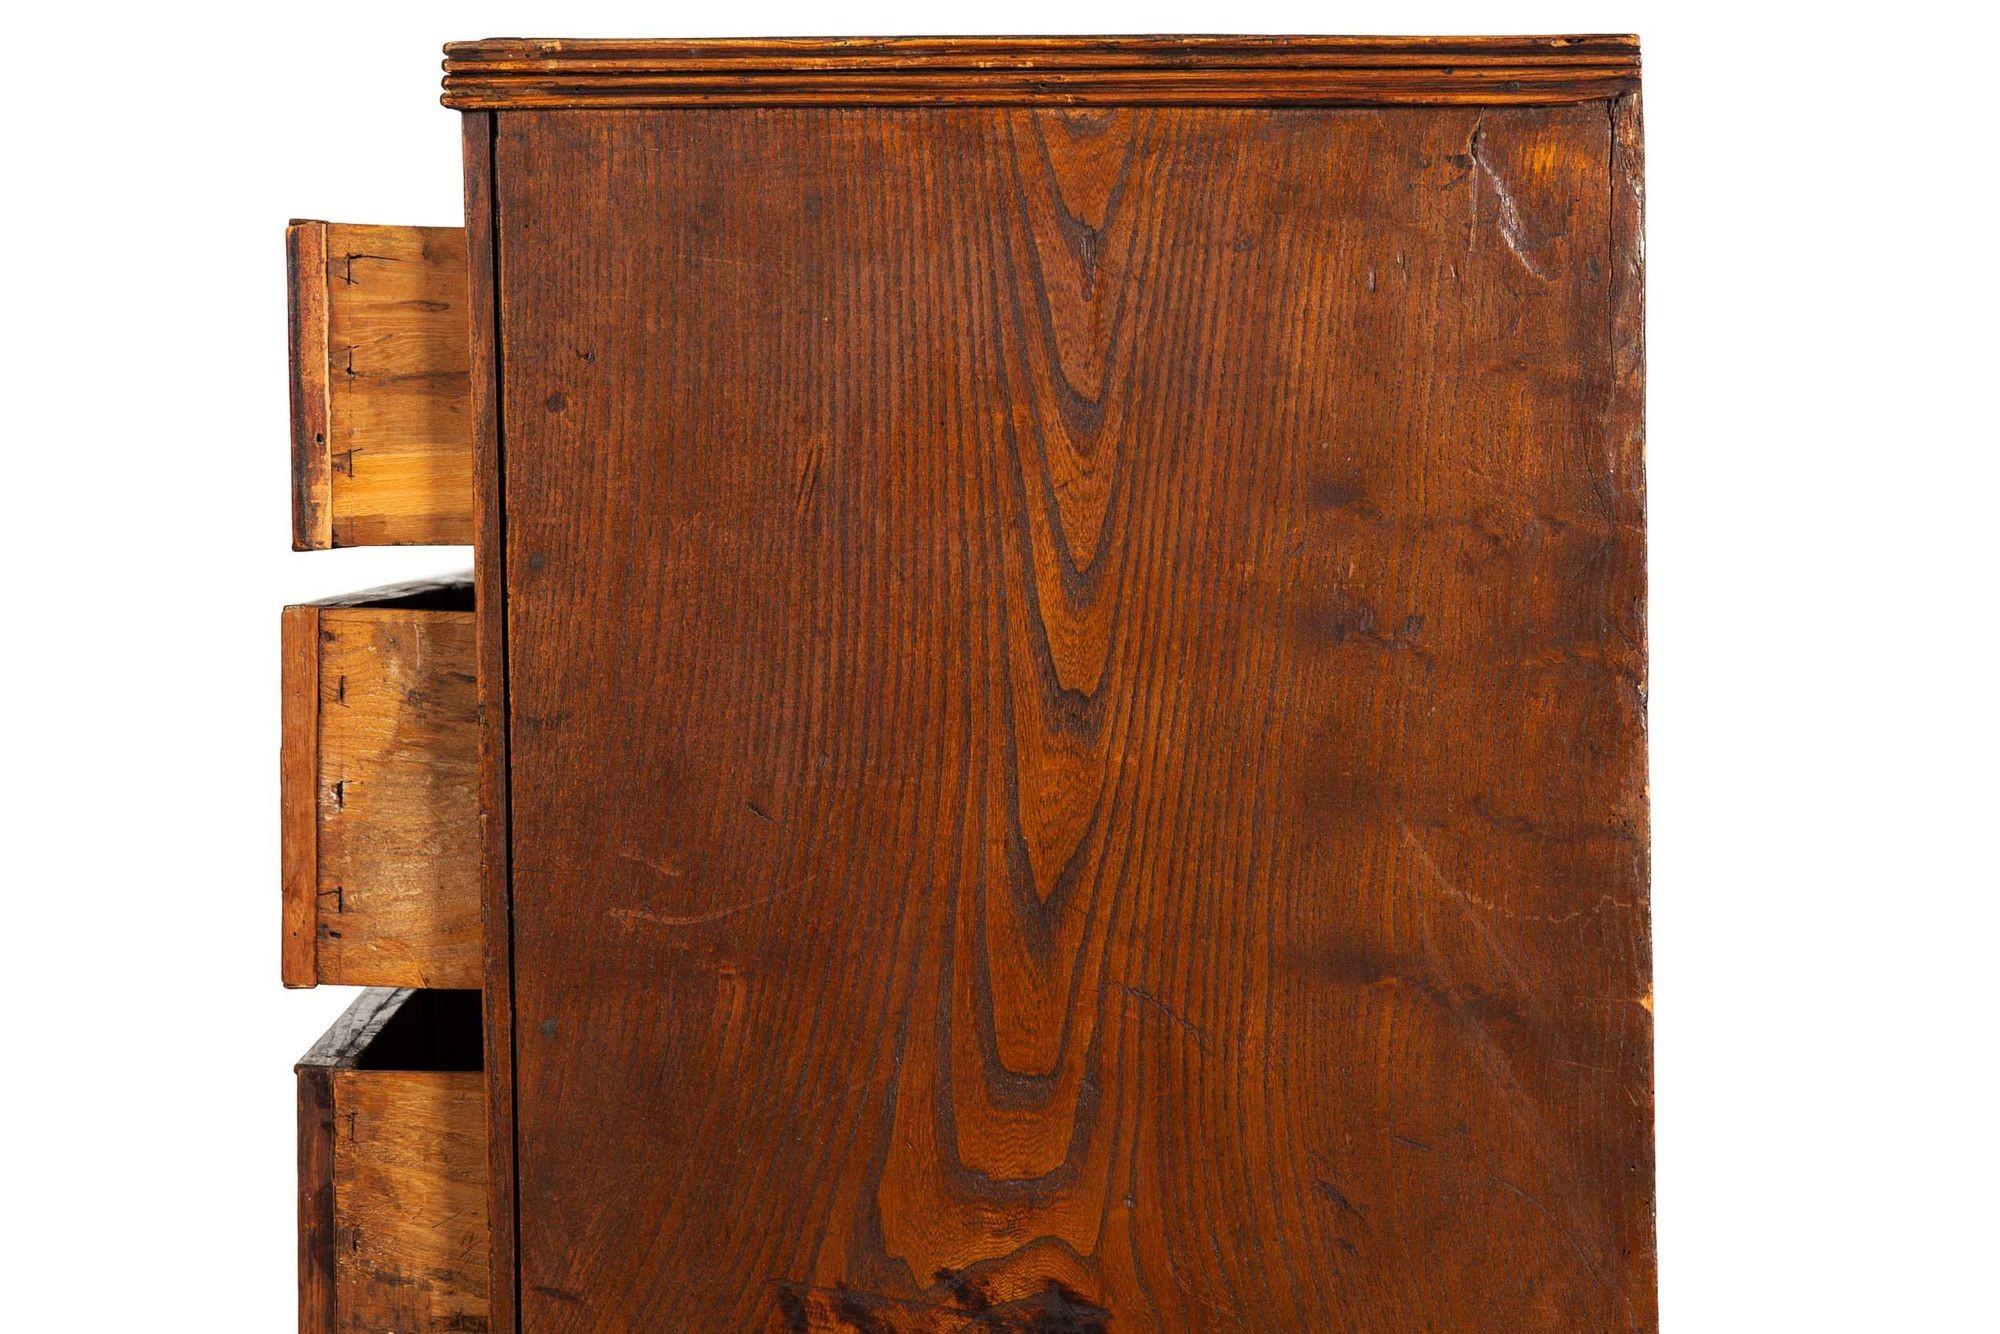 English Antique Patinated Worn Elm Chest of Drawers, Early 19th Century For Sale 4